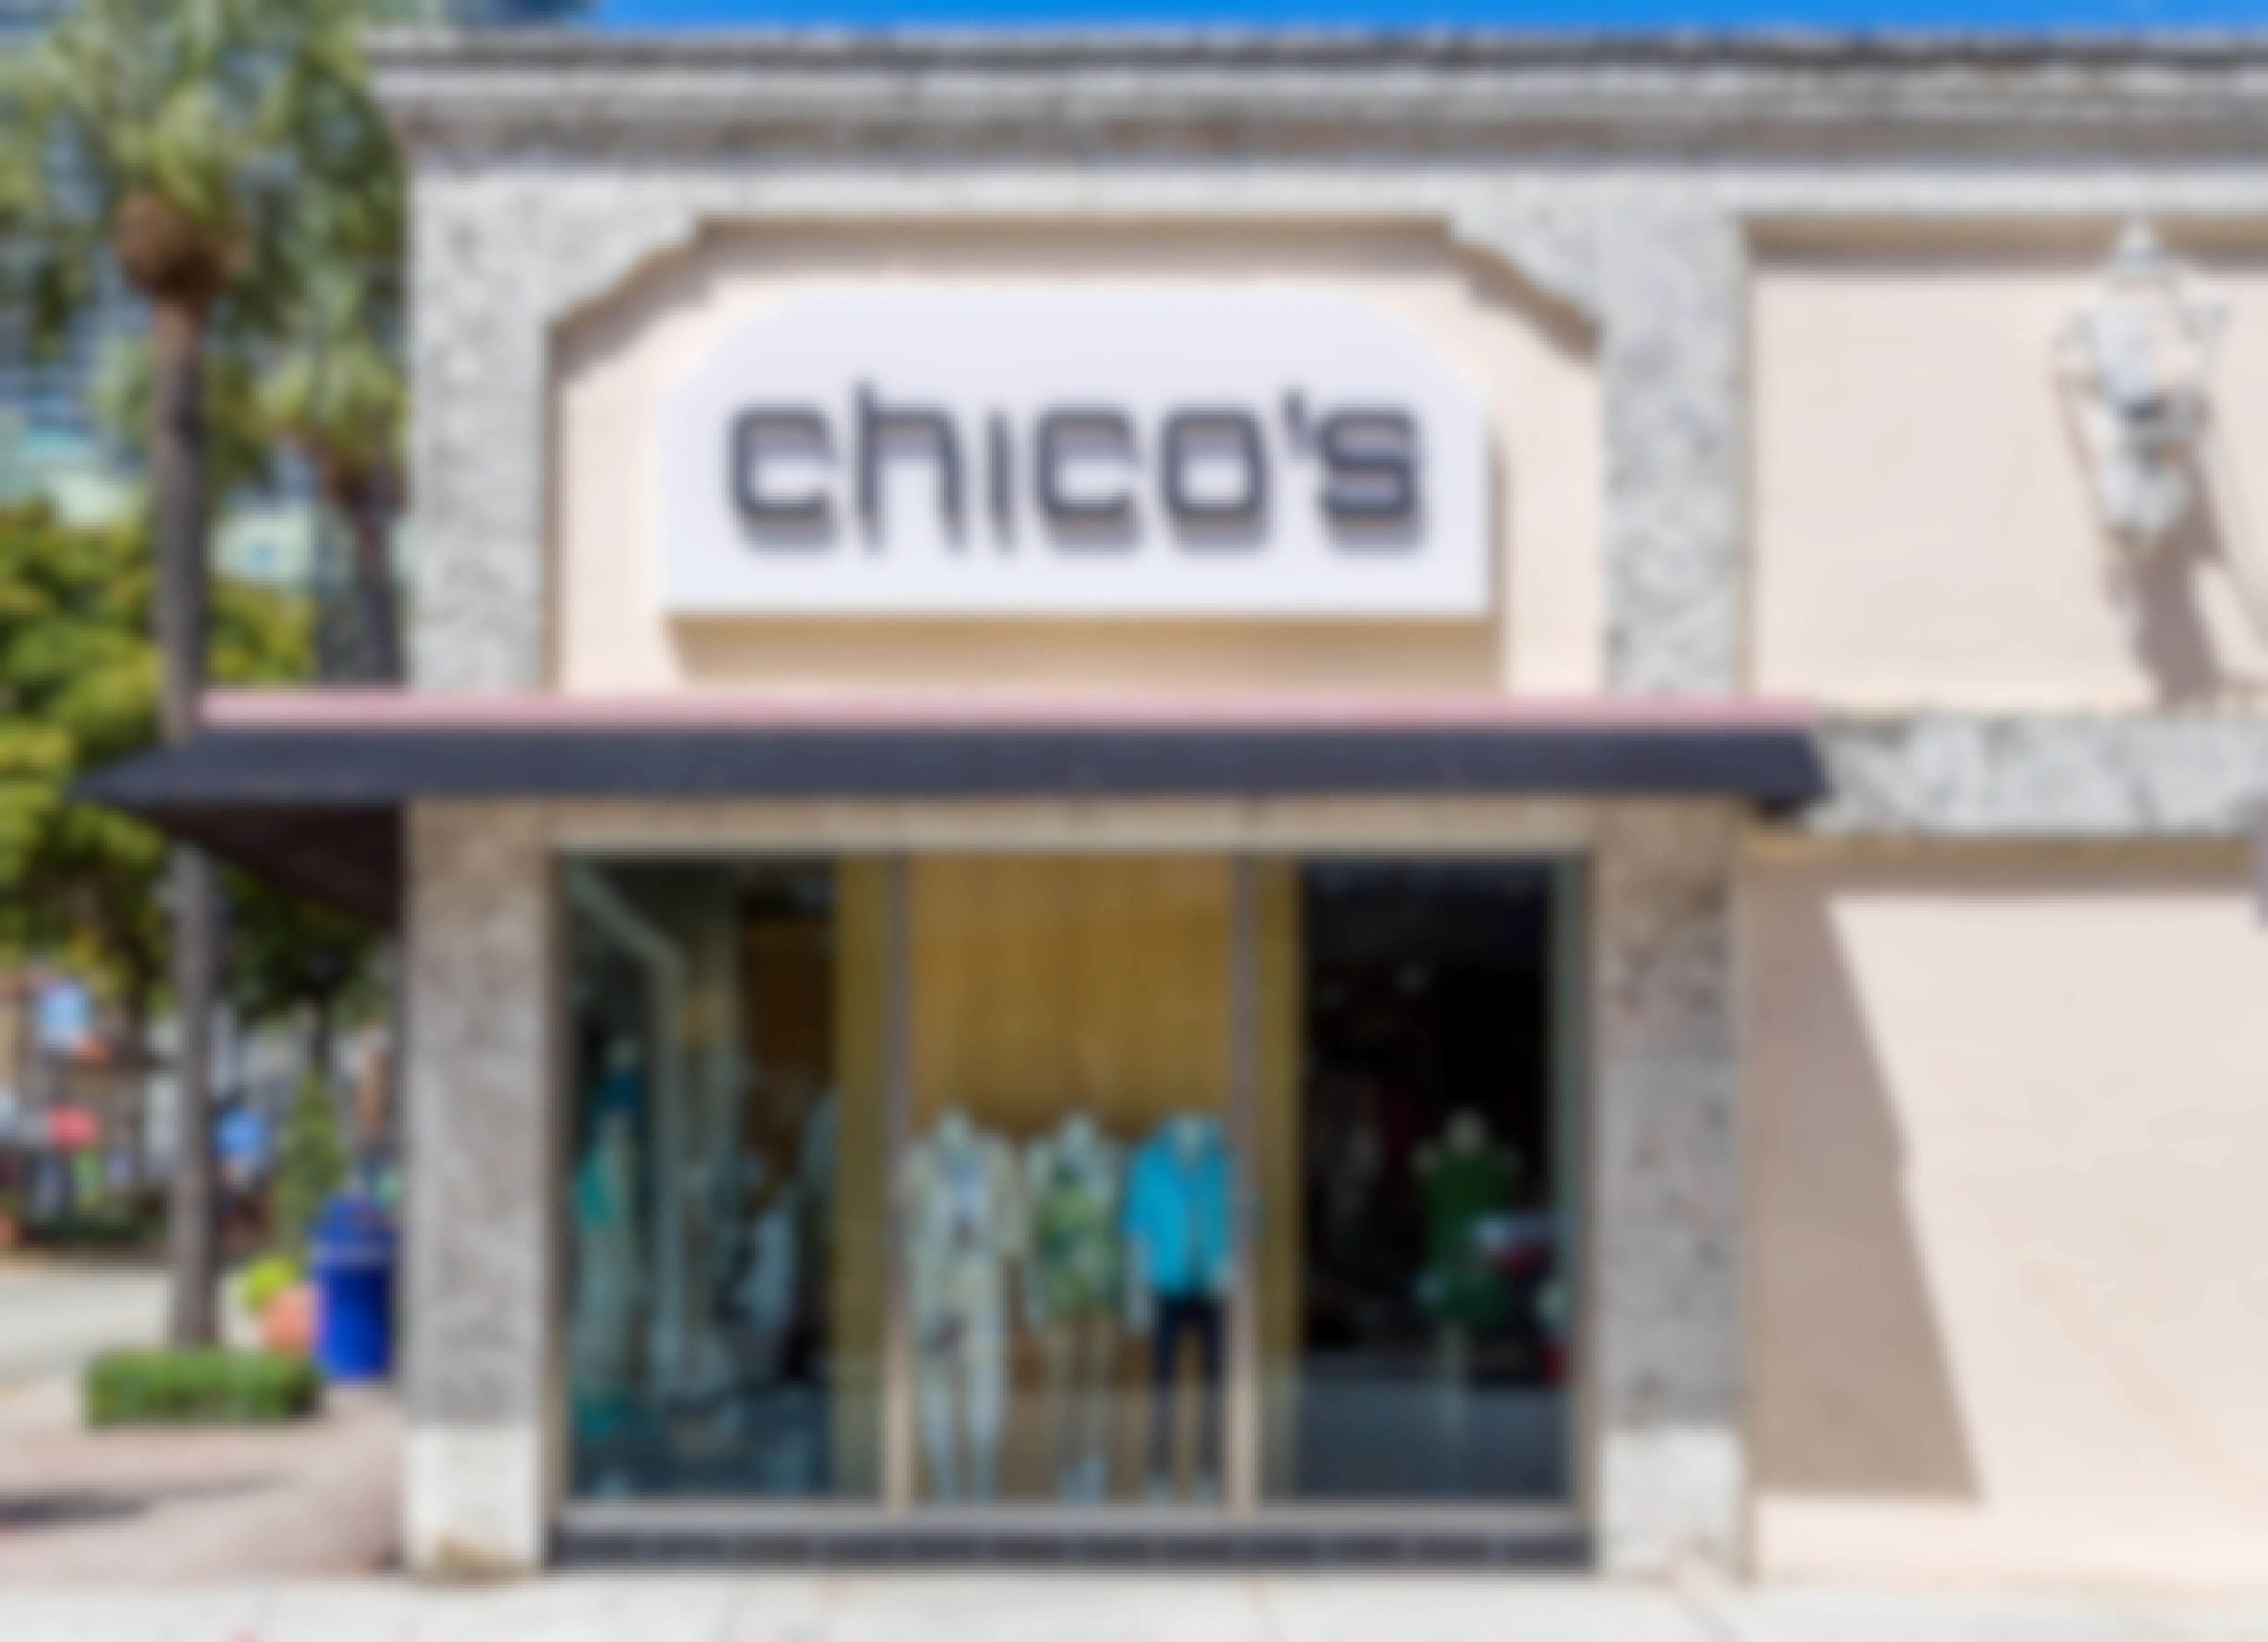 Chico's retail store location, store front.